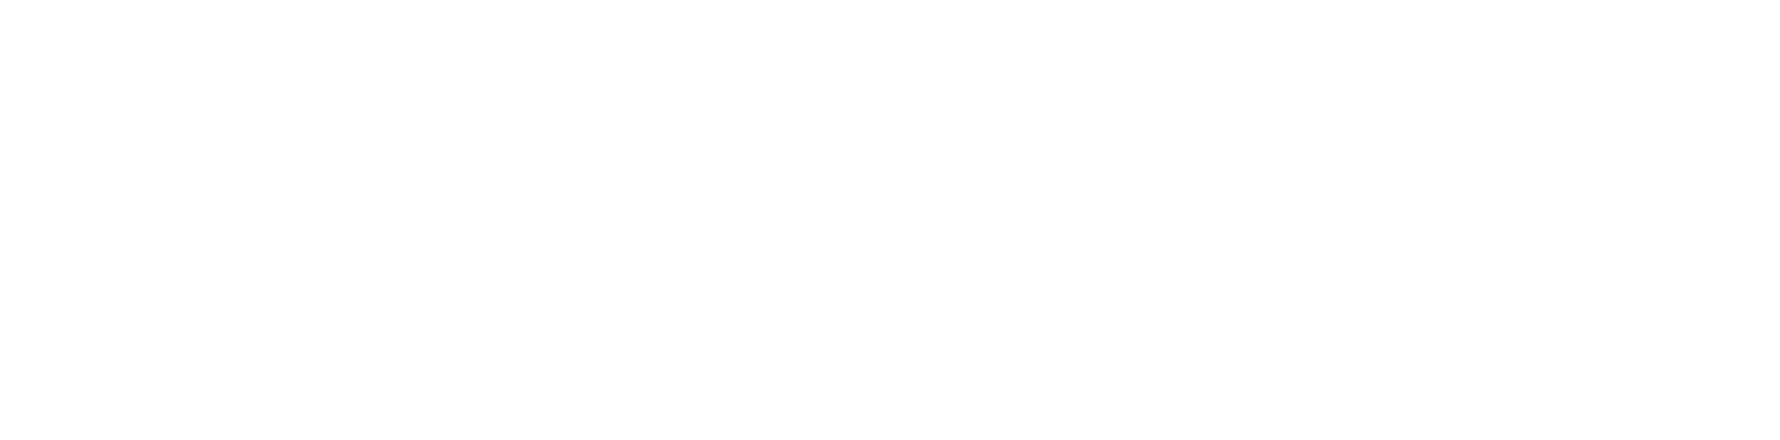 The Green Party